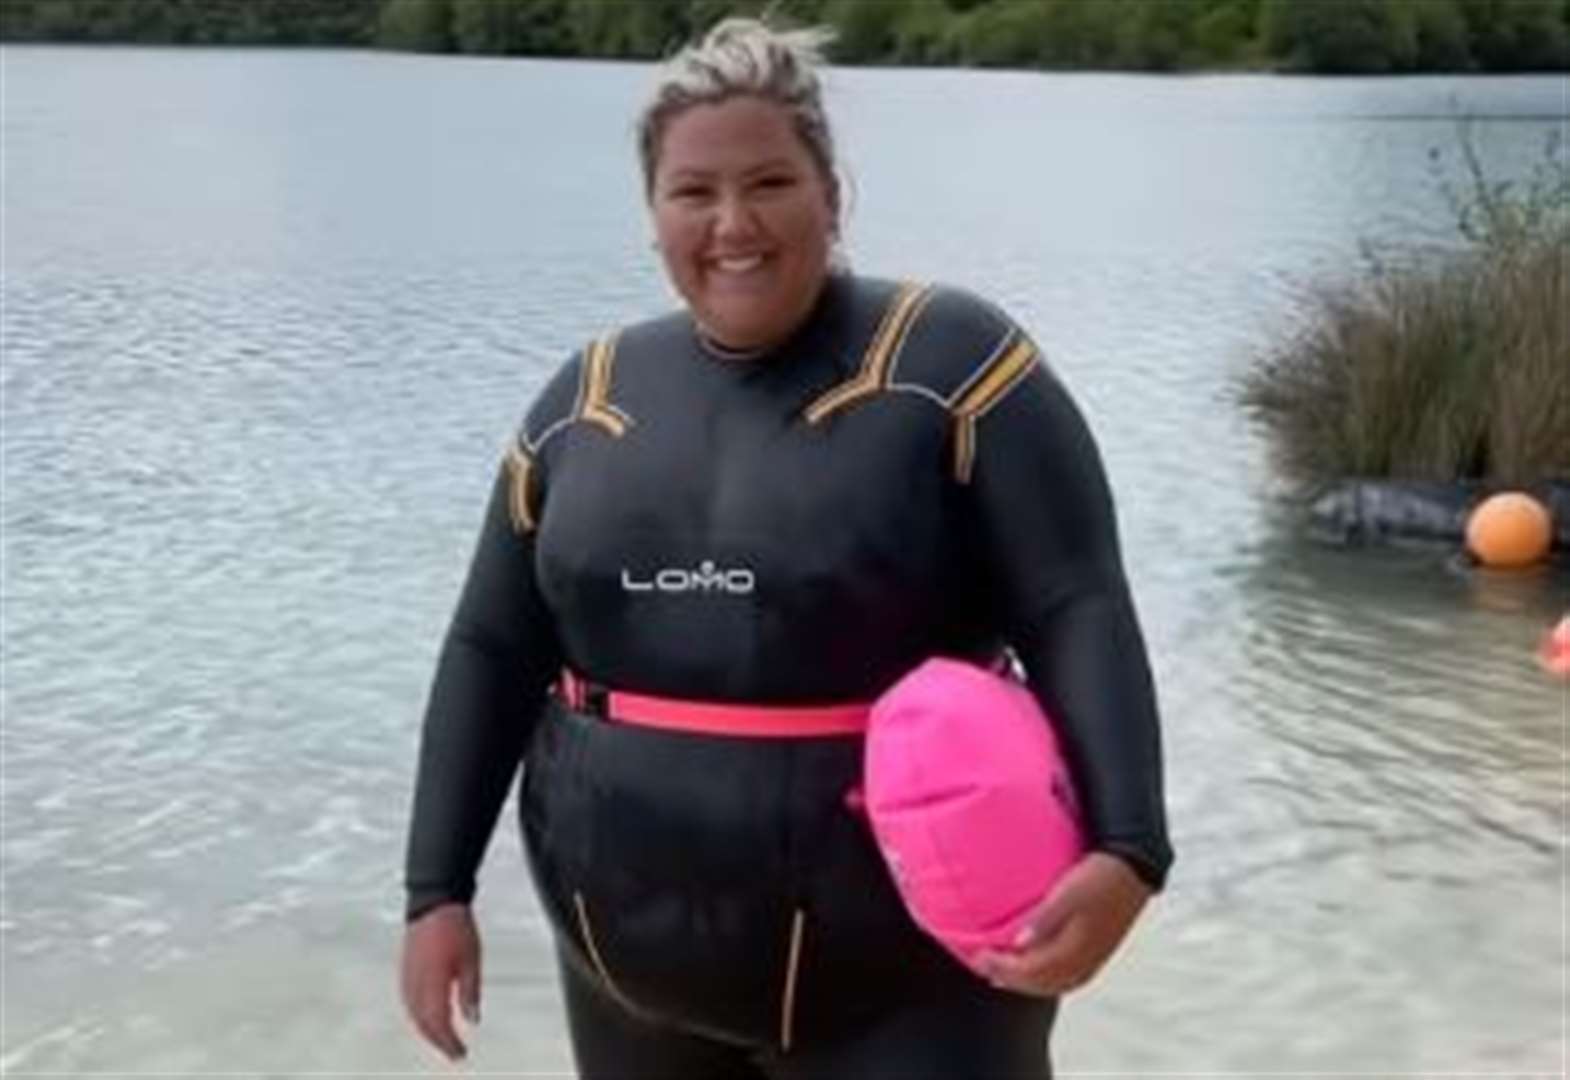 'I had to wear a wetsuit, it was cold...but it was amazing!'